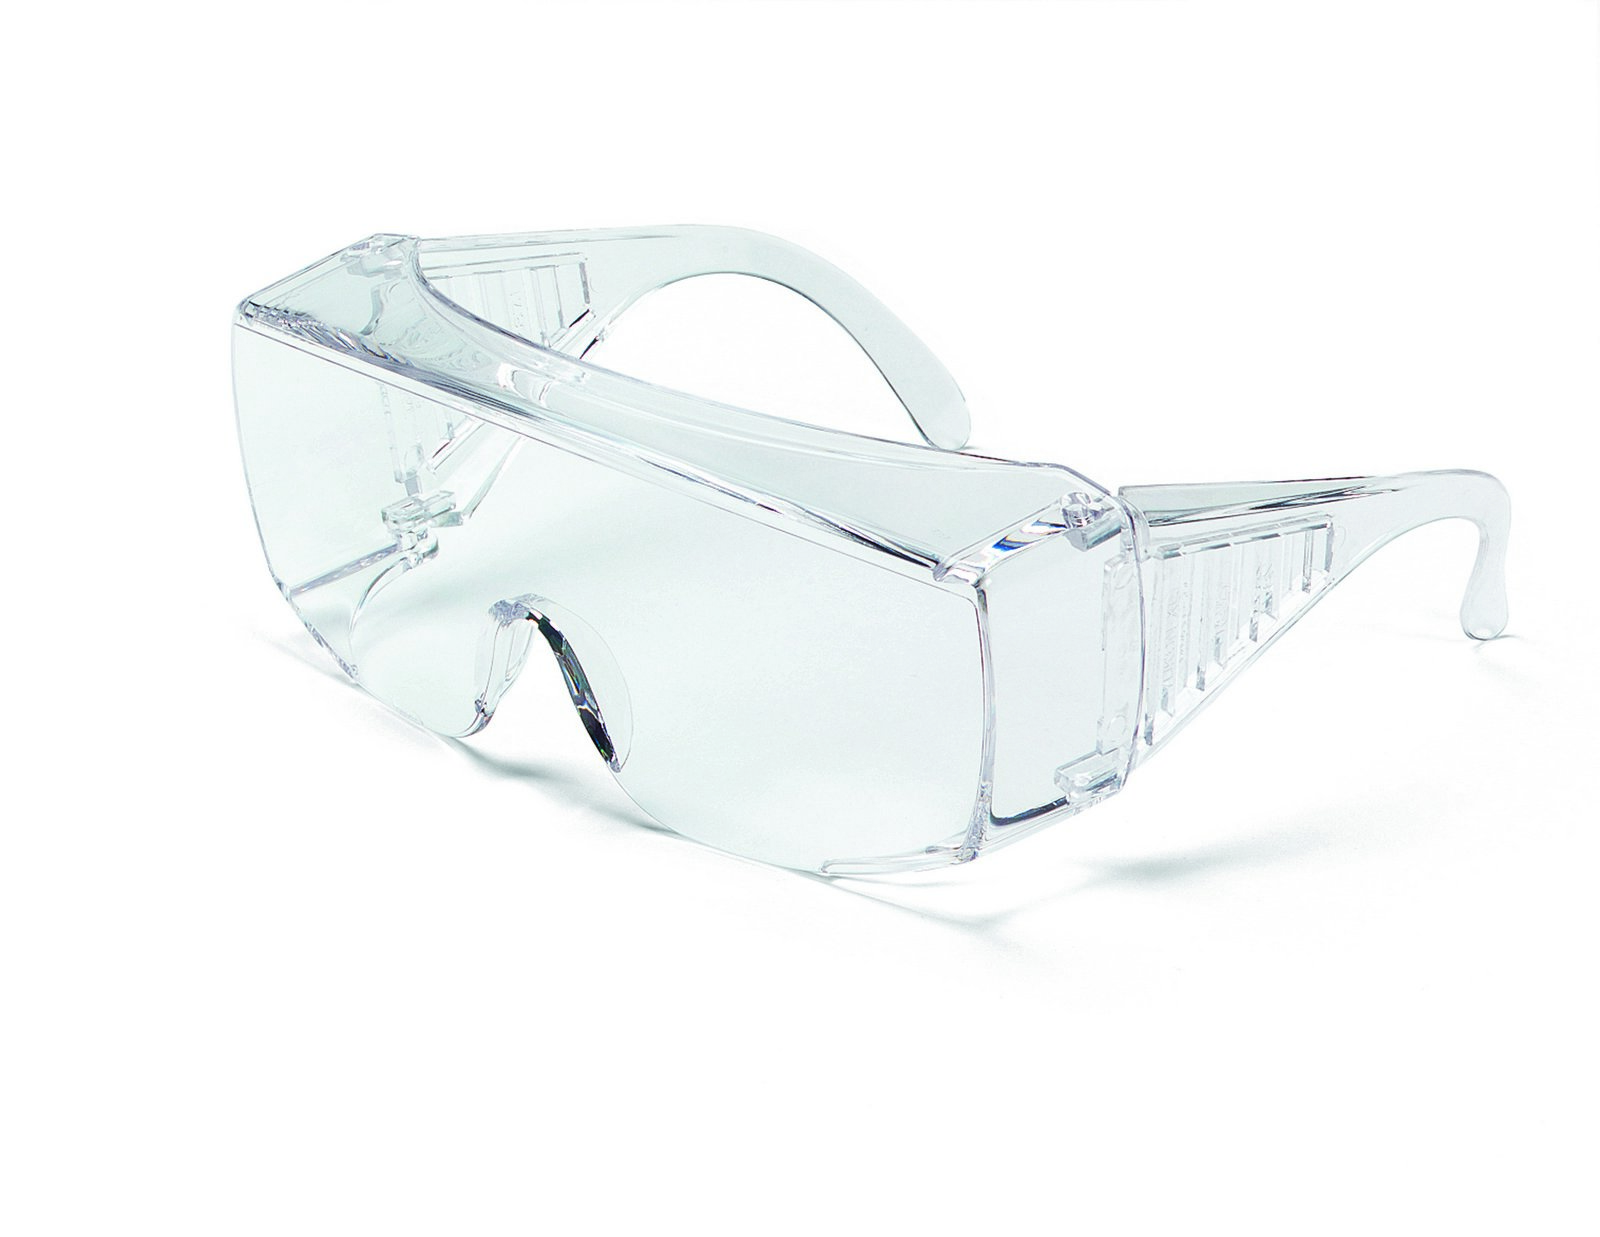 98 Series XL Safety Glasses